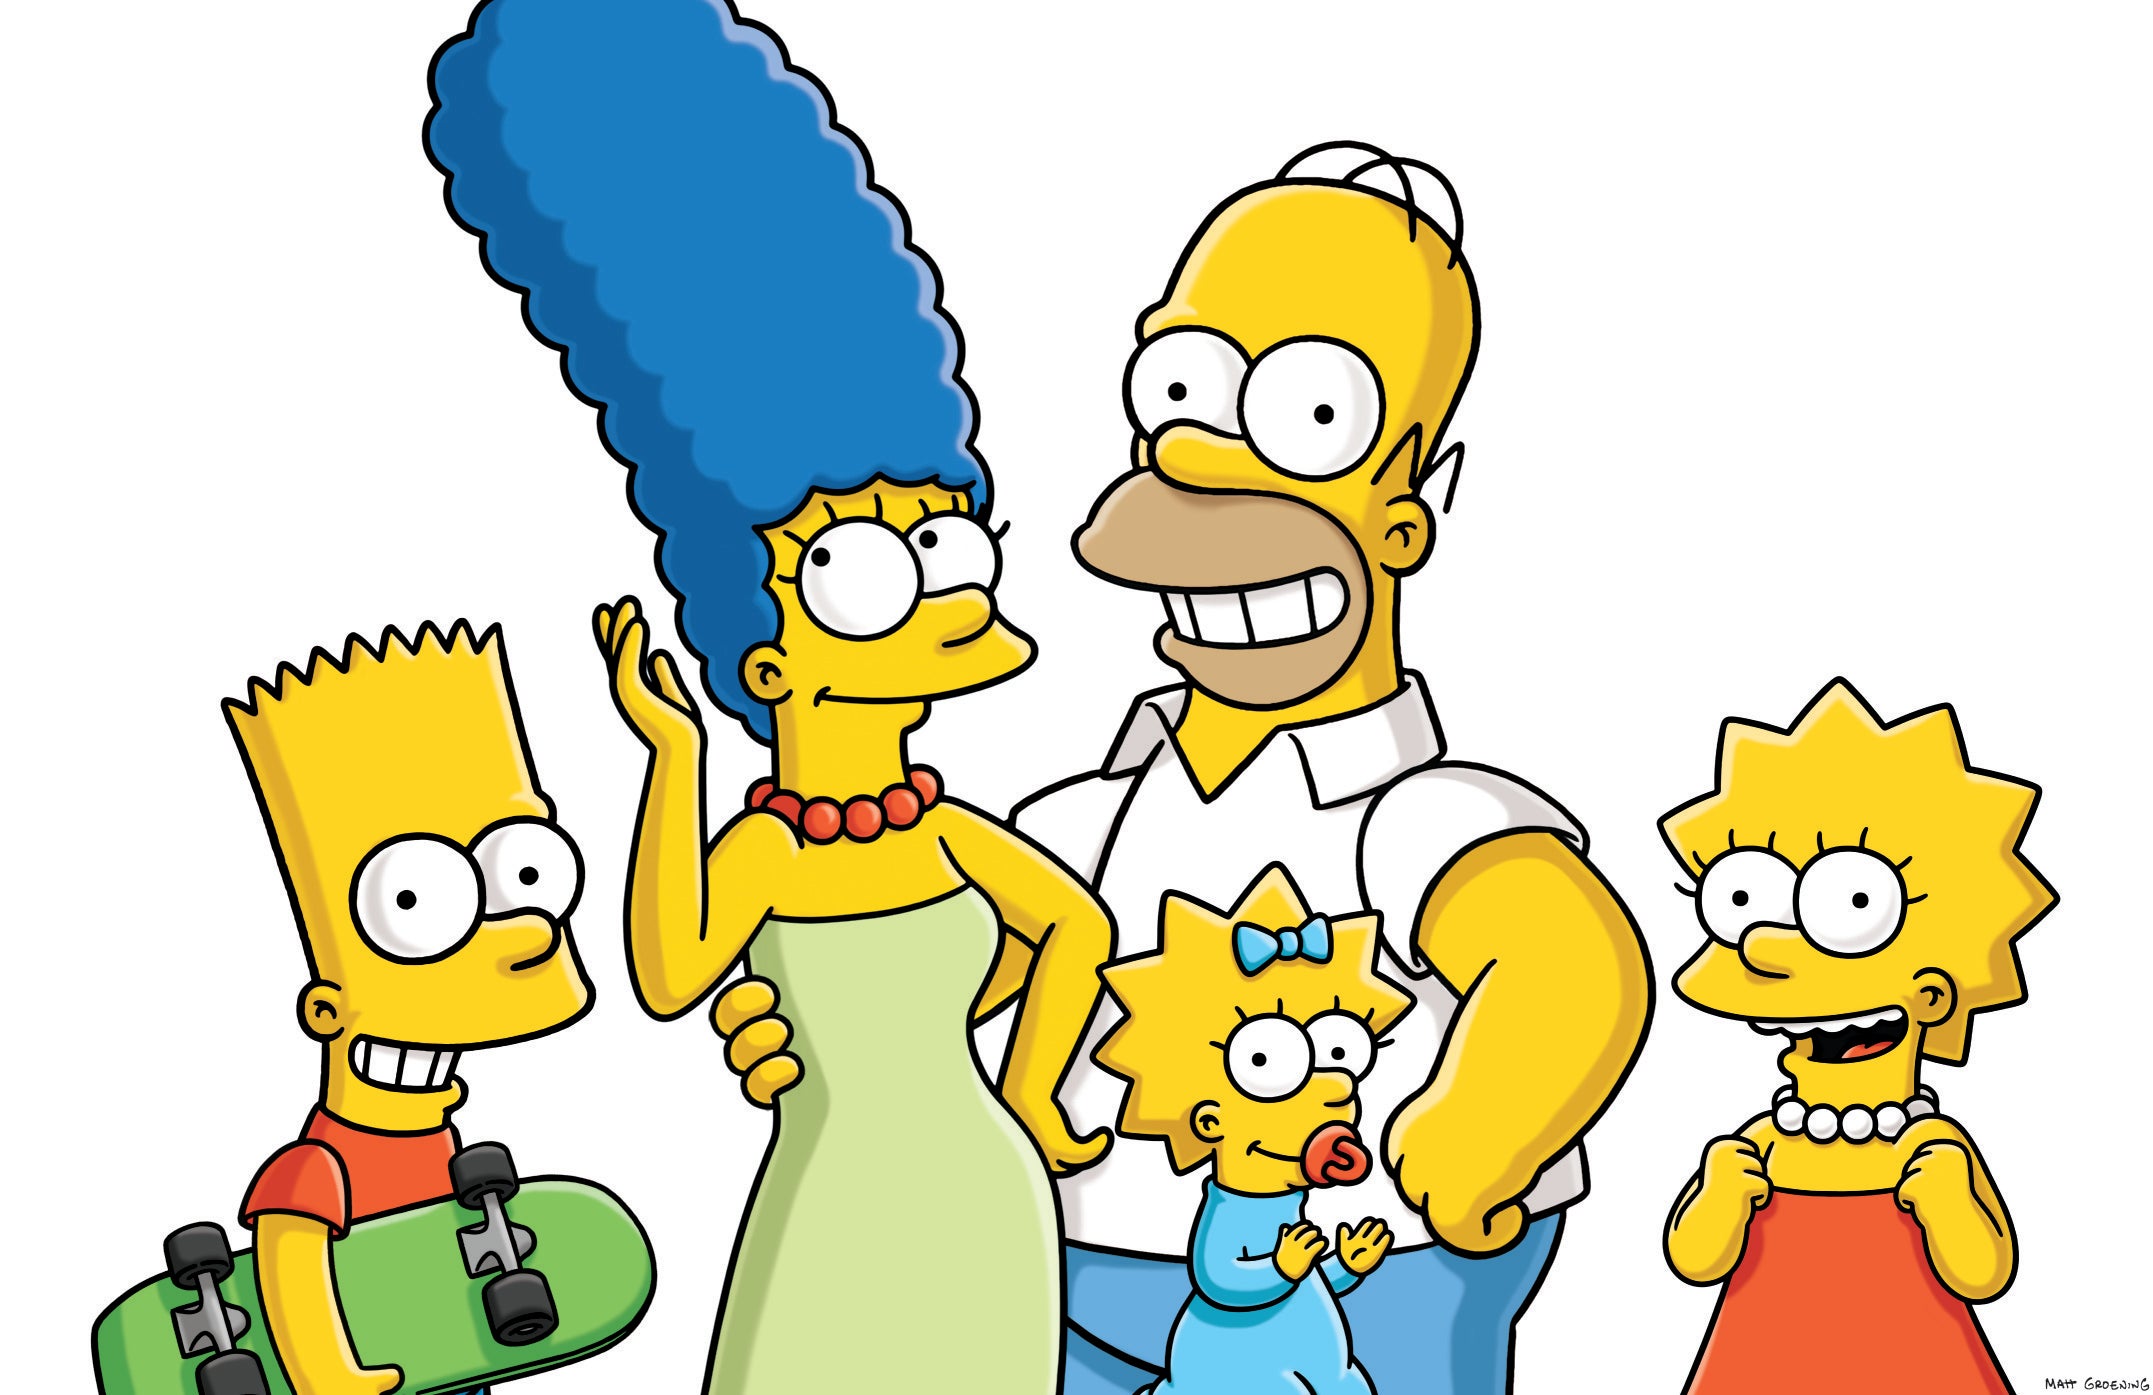 The Simpsons Pulls Off a Mother's Day Prank